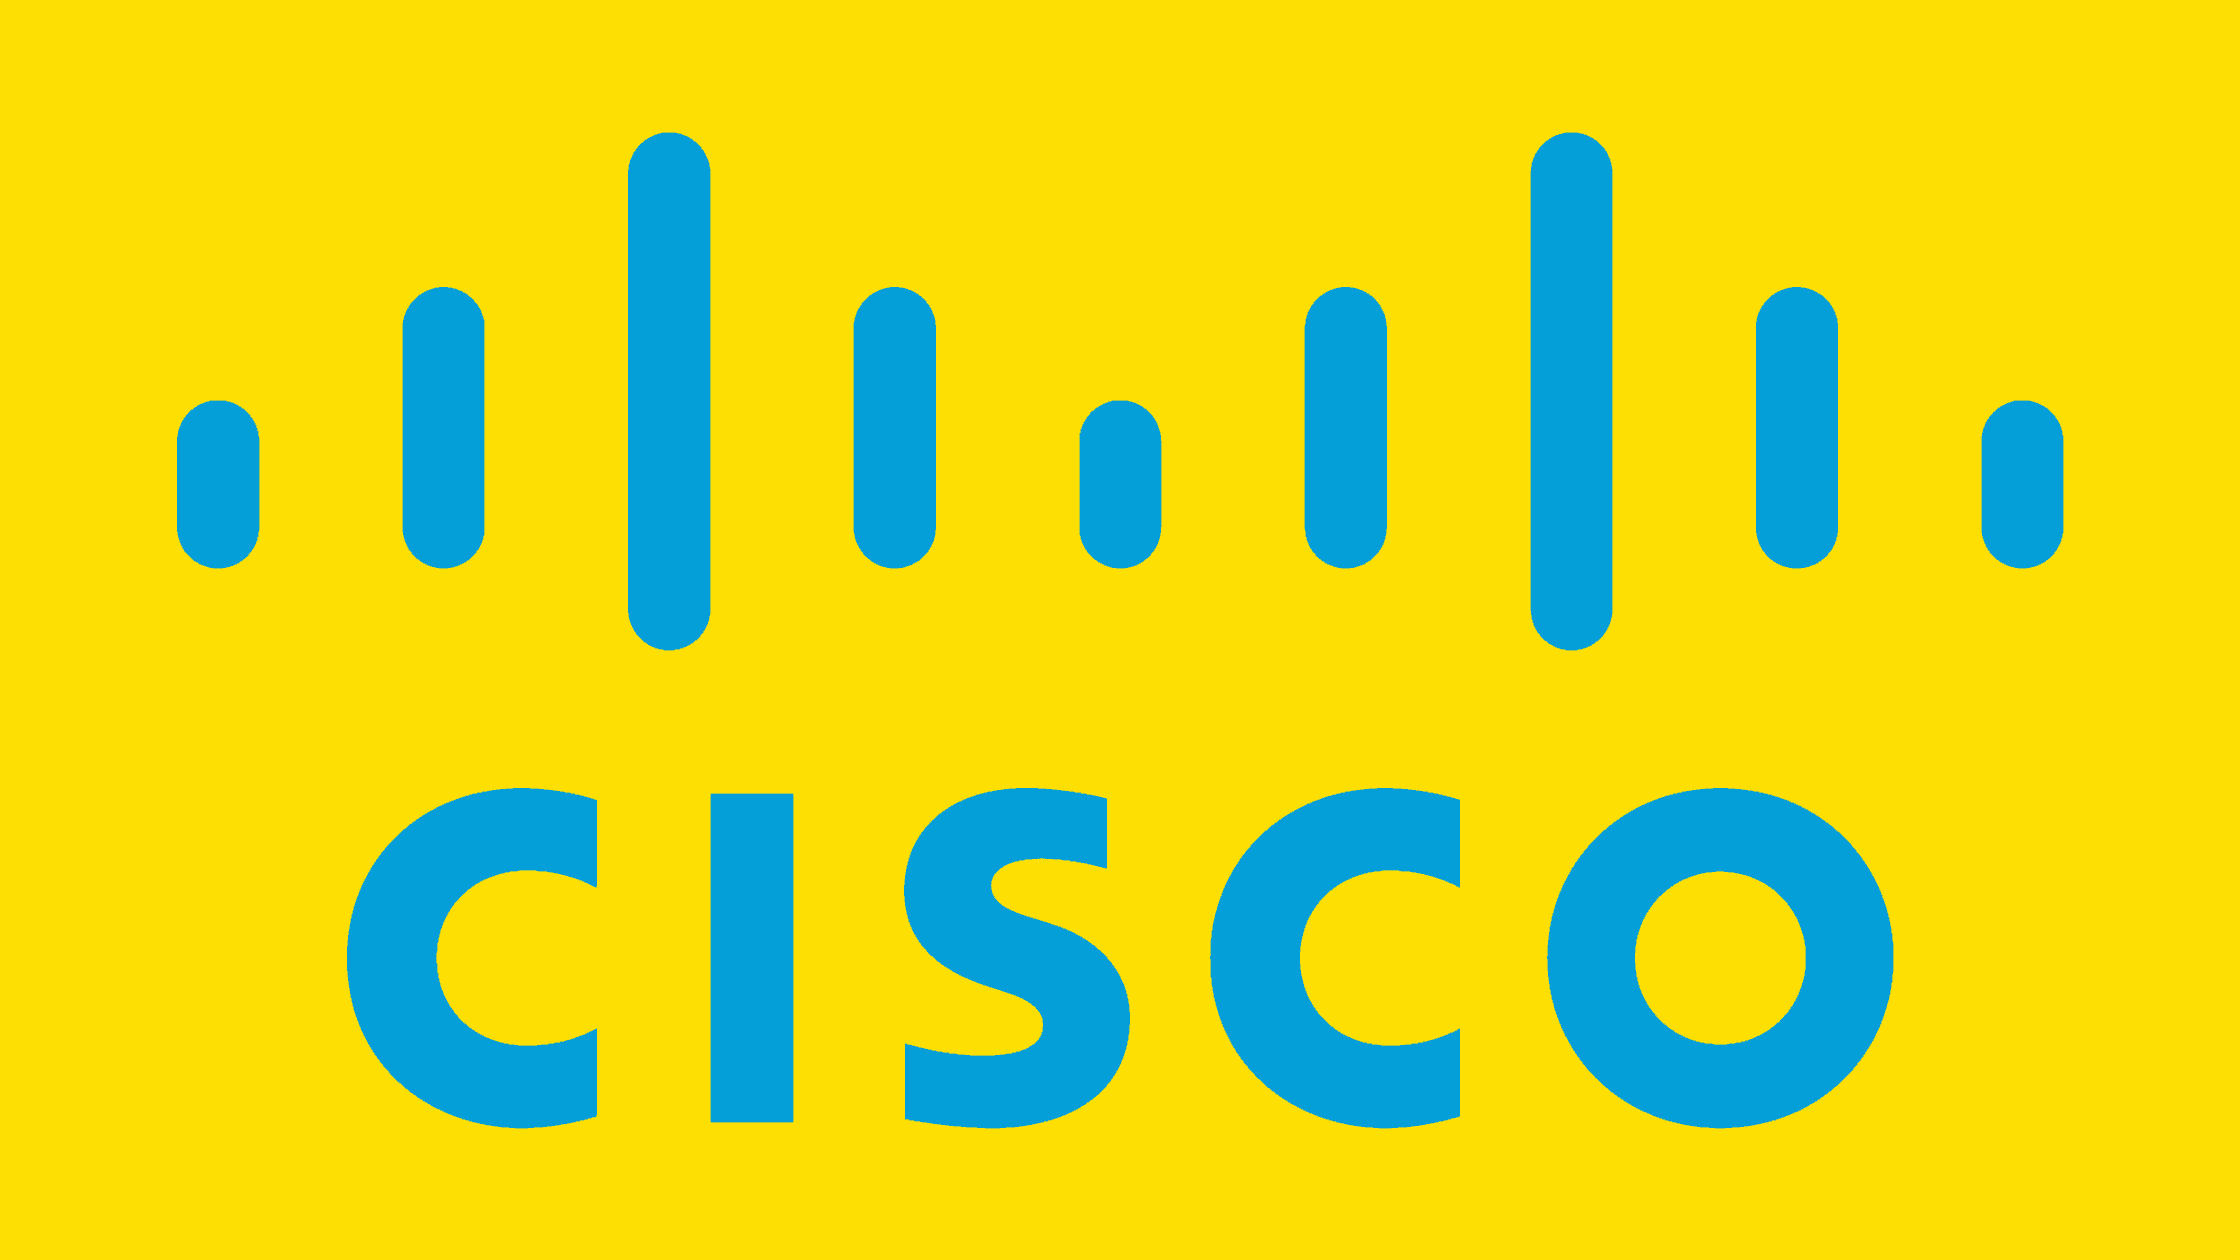 How To Fix Cve 2022 20842 A Remote Code Execution Vulnerability In Cisco Rv Series Routers